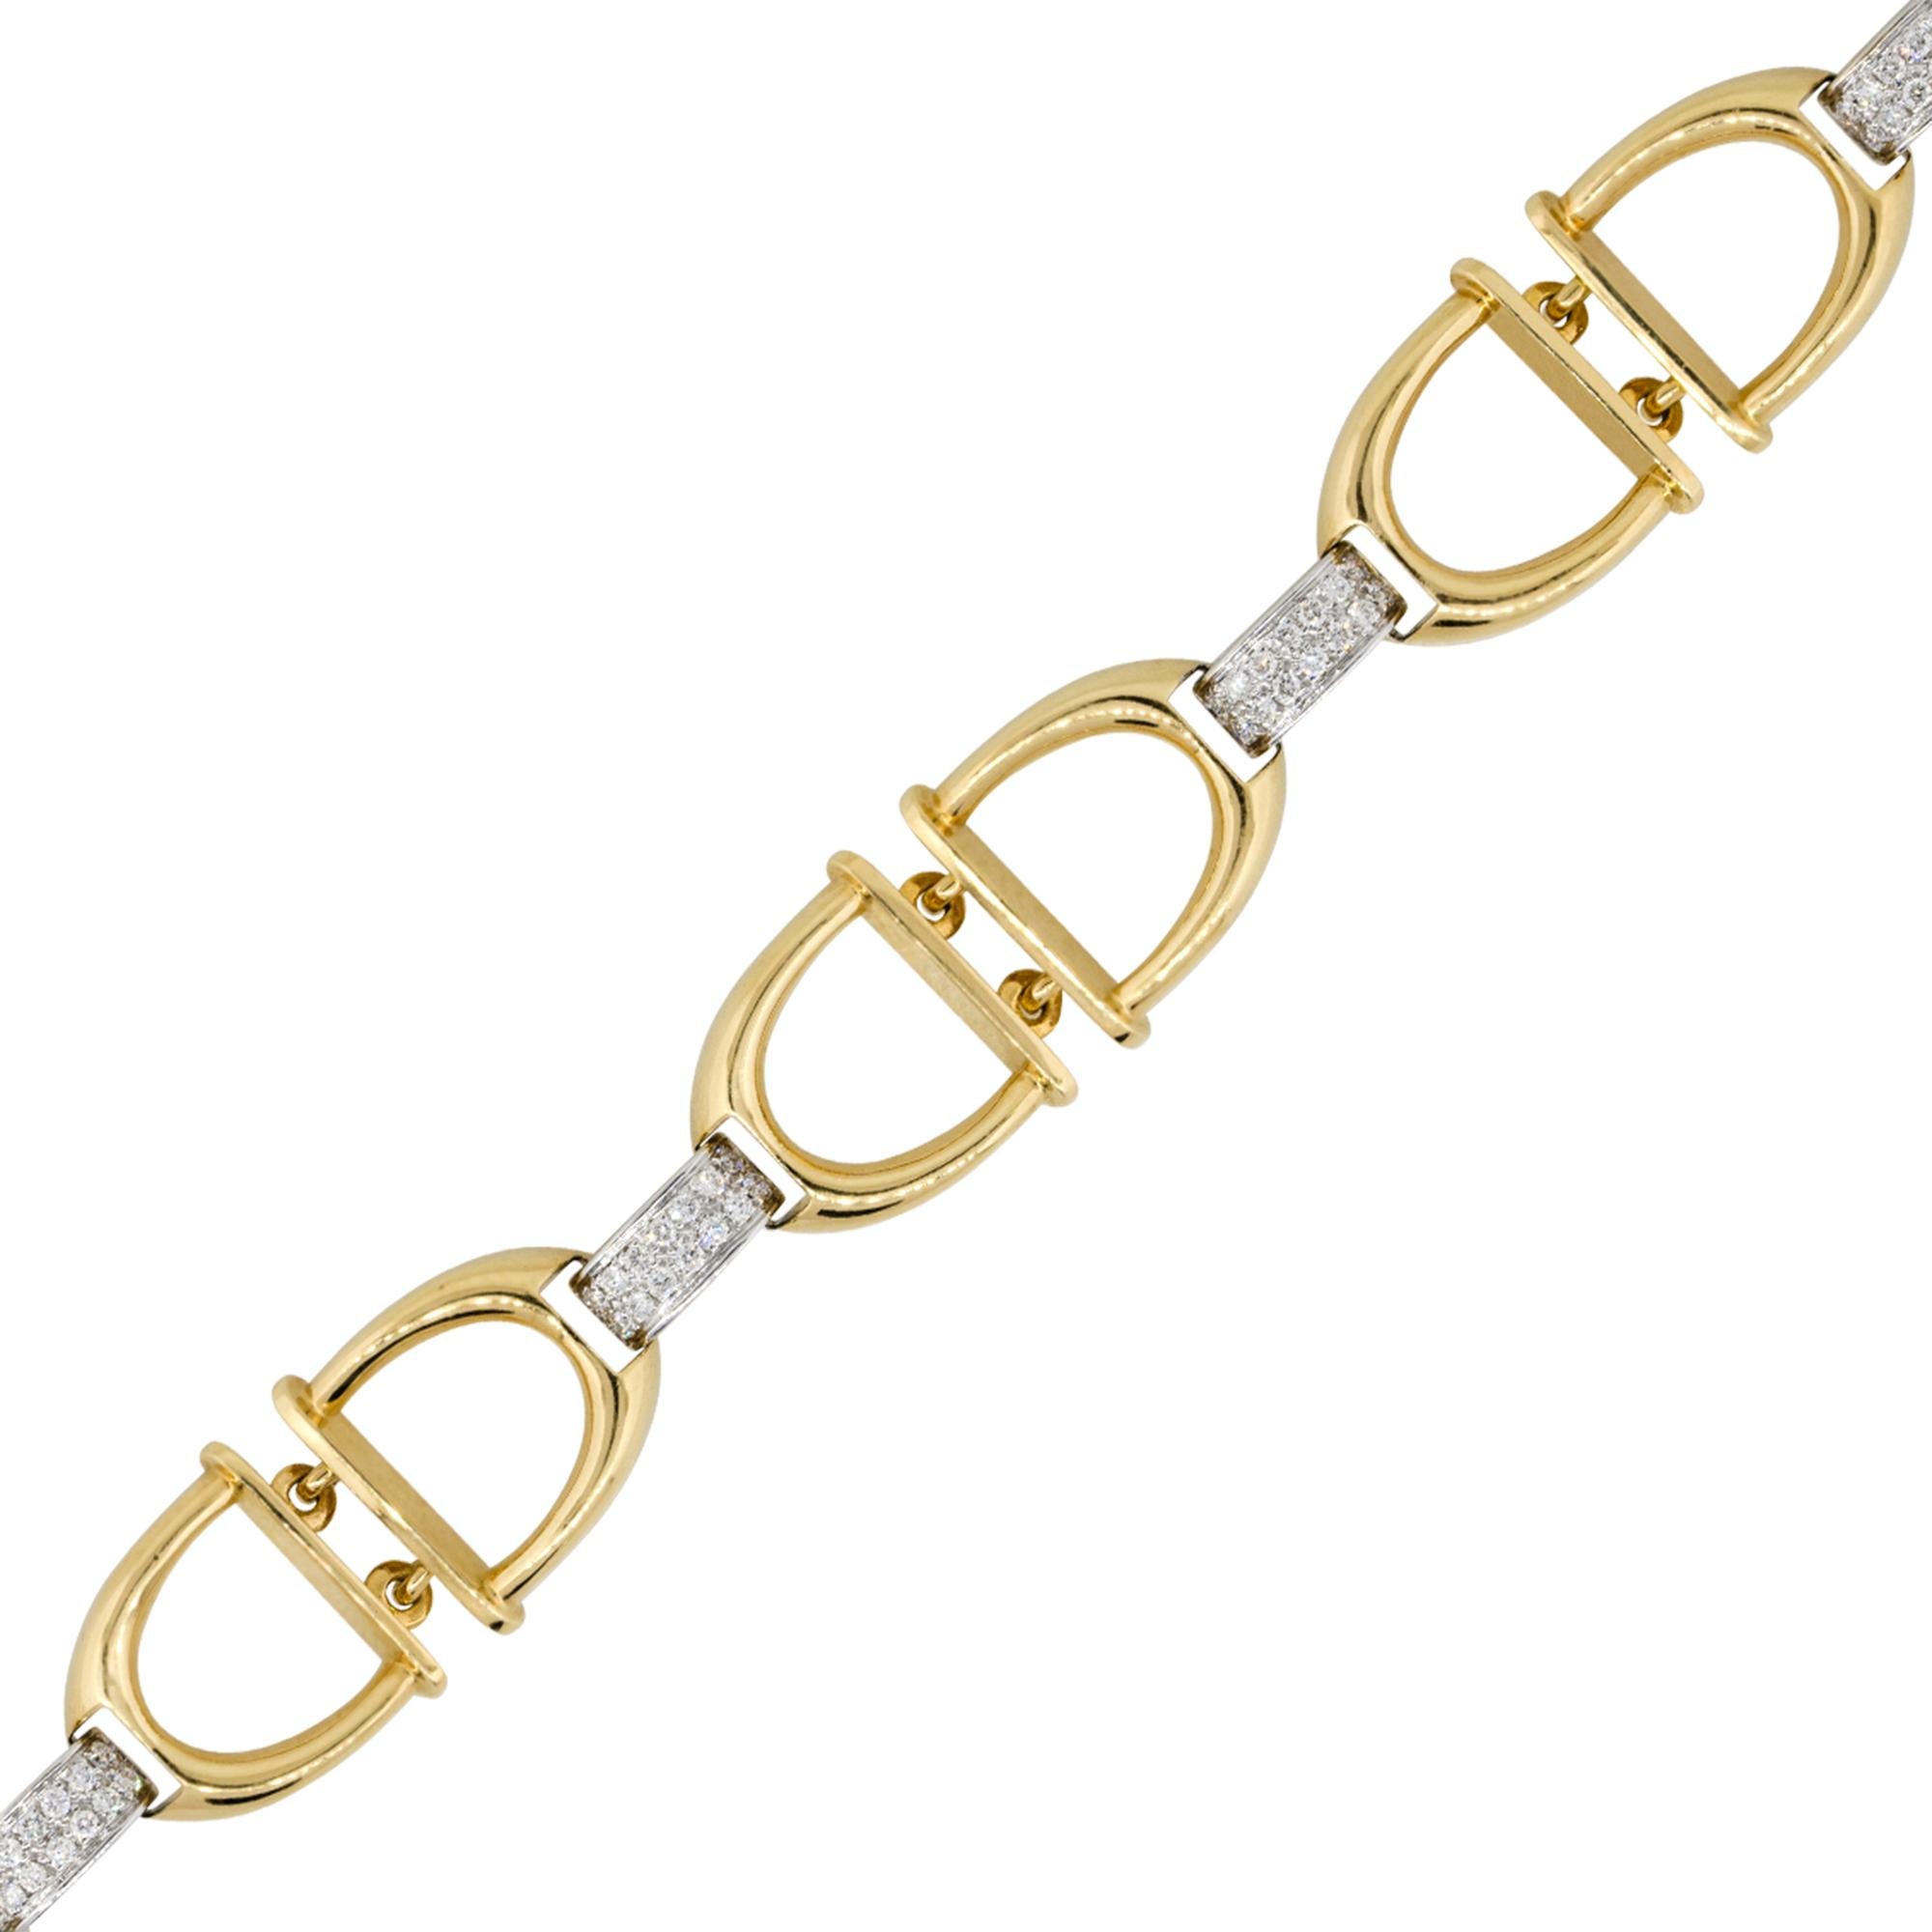 Material: 18k Yellow Gold
Diamond Details: Approx. 0.60ctw of round cut Diamonds. Diamonds are G/H in color and VS in clarity
Clasps: Tongue in box clasp with safety latch
Total Weight: 32.2g (20.7dwt)
Length: 7